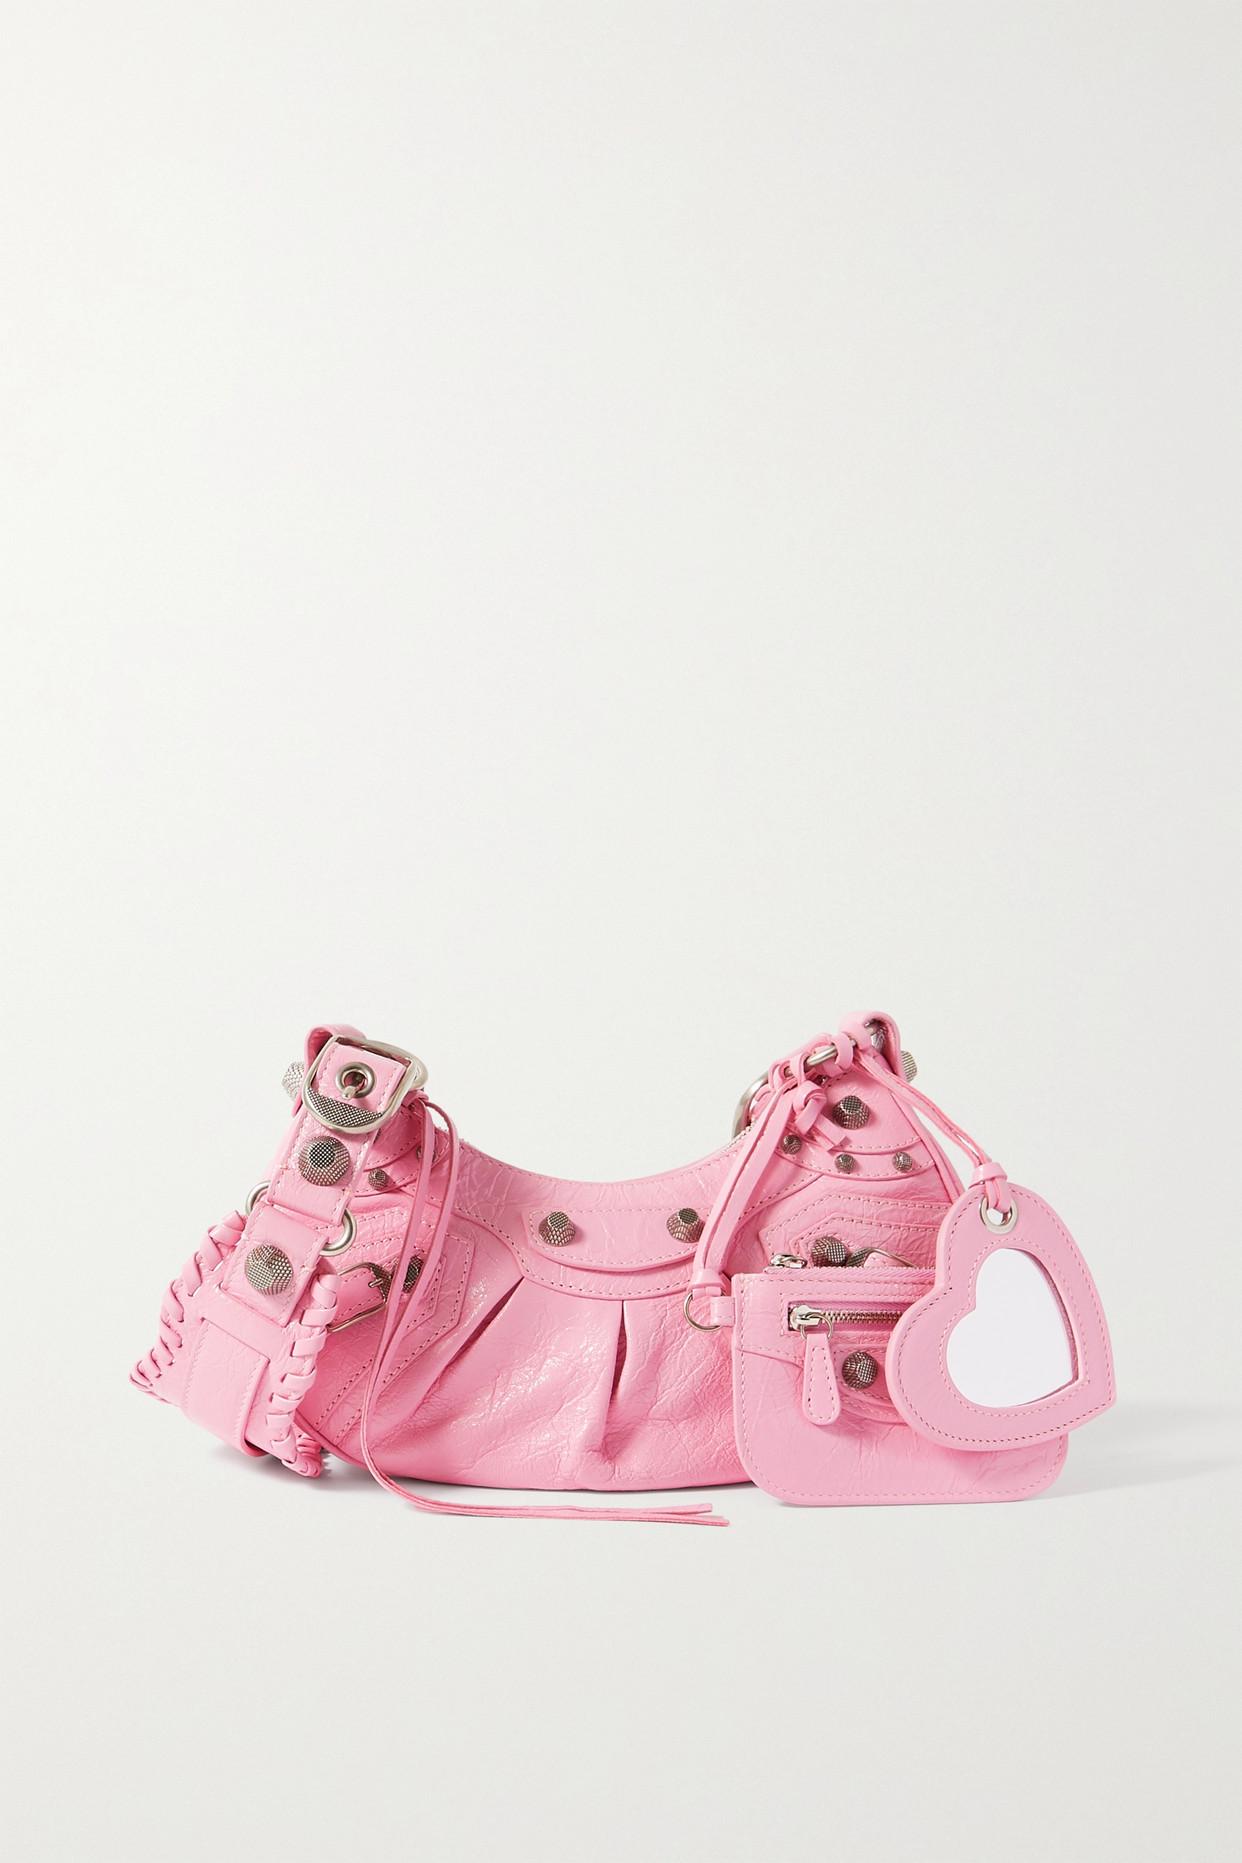 Balenciaga Cagole Xs Studded Textured-leather Shoulder Bag in Pink 